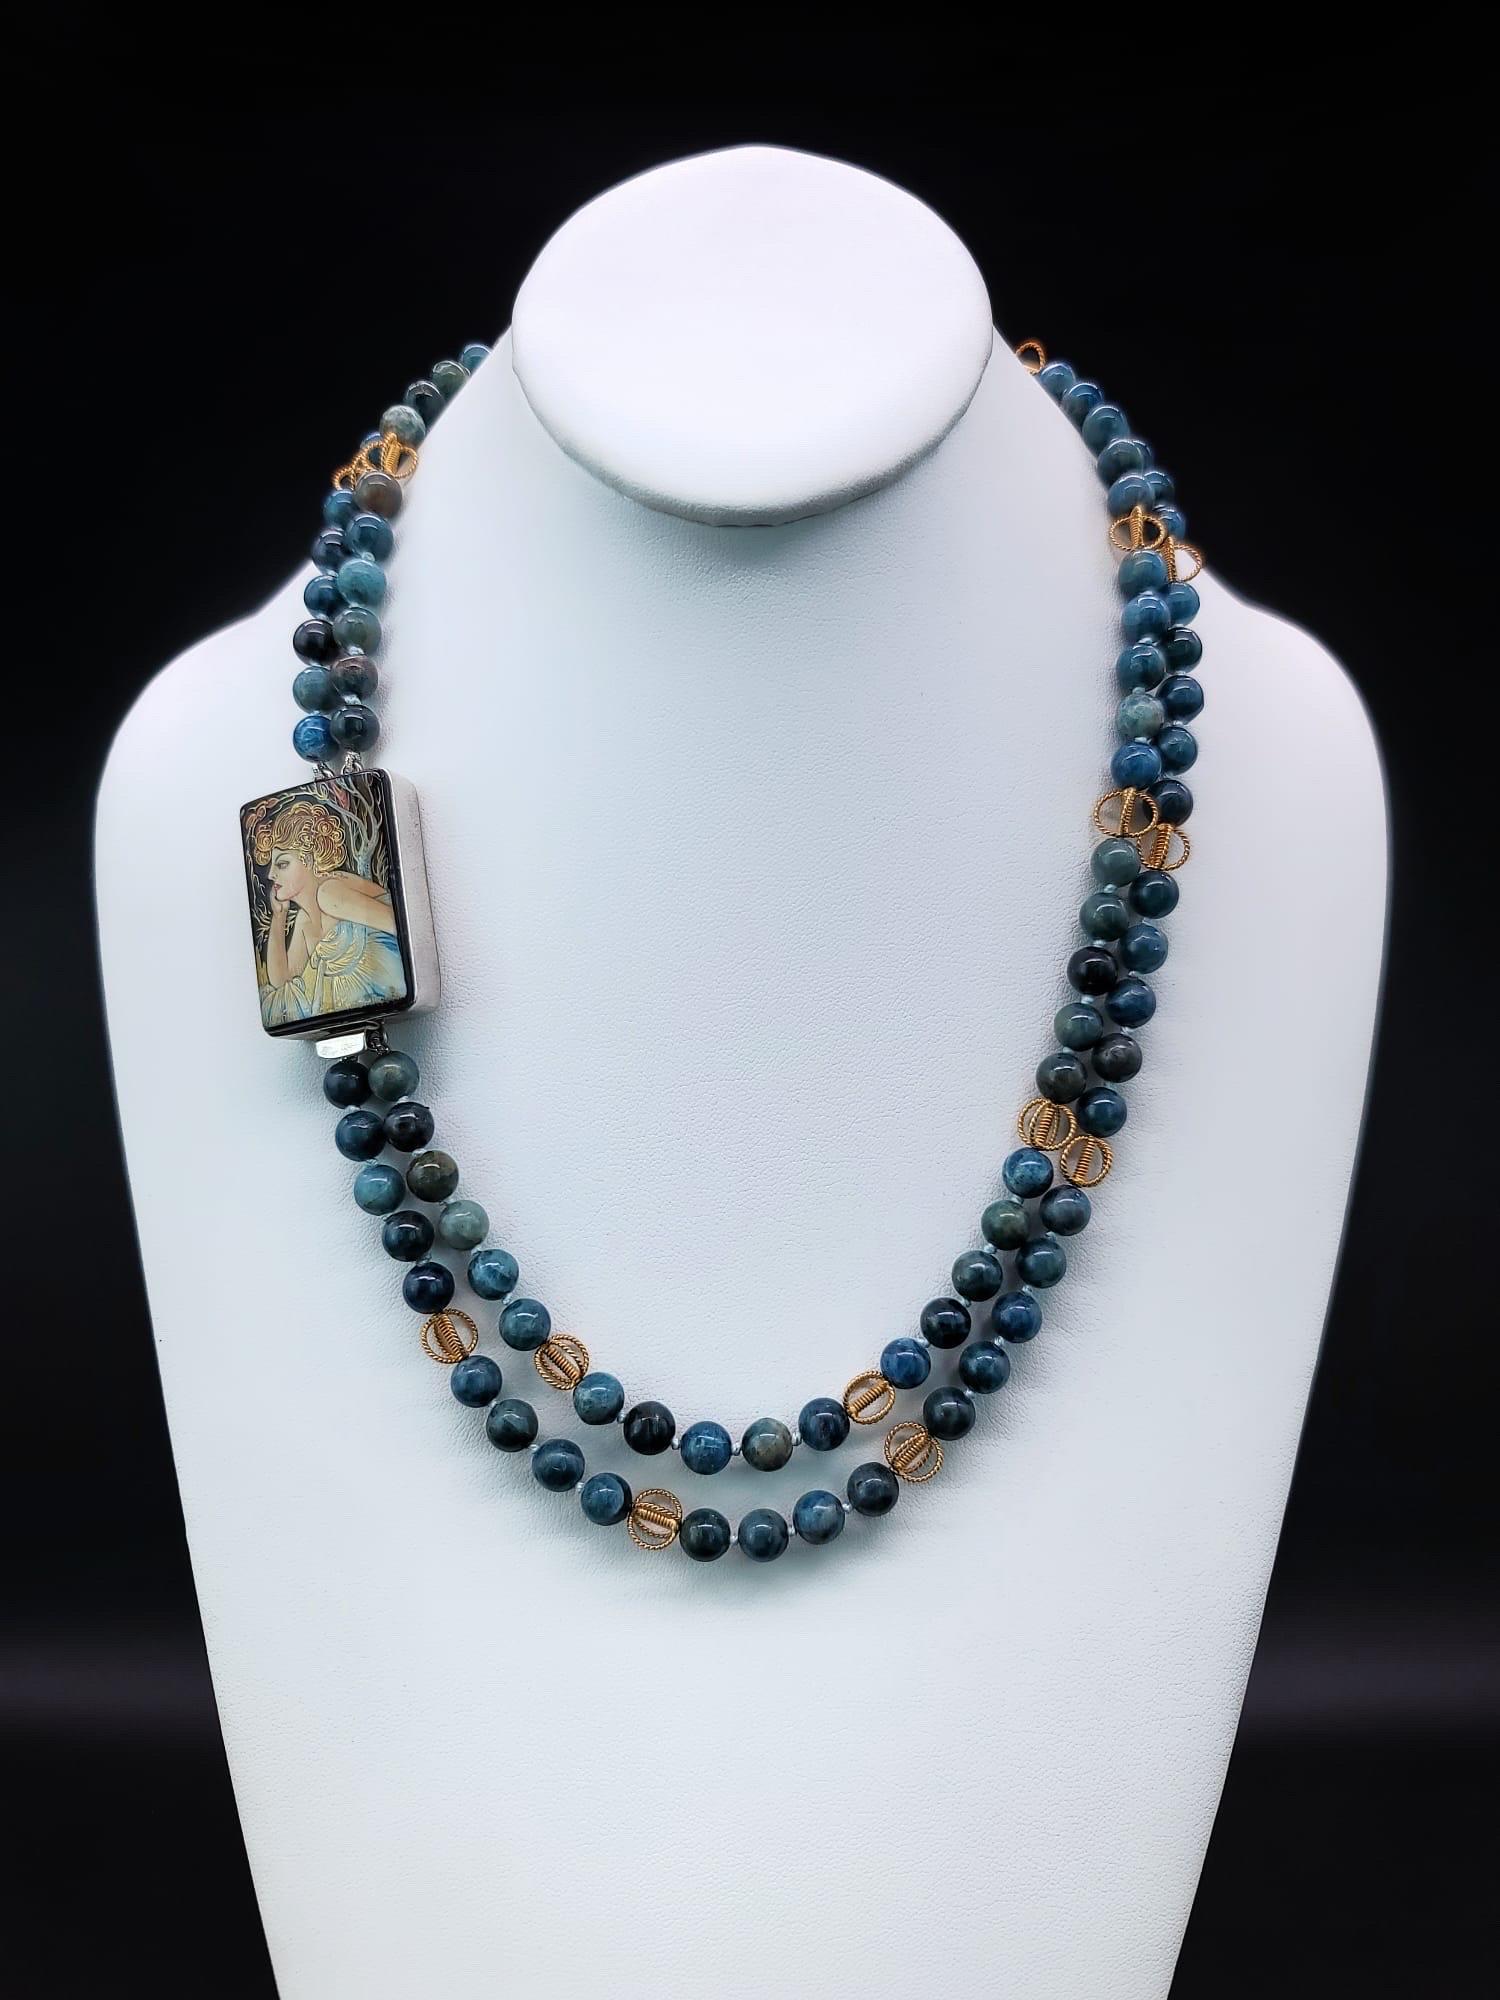 One-of-a-Kind
A double strand of 8mm Apatite beads punctuates by delicate filigree beads spaced at intervals.
The beads provide the backdrop for the lovely art Miniature Sterling Silver box clasp meticulously painted in the traditional manner with